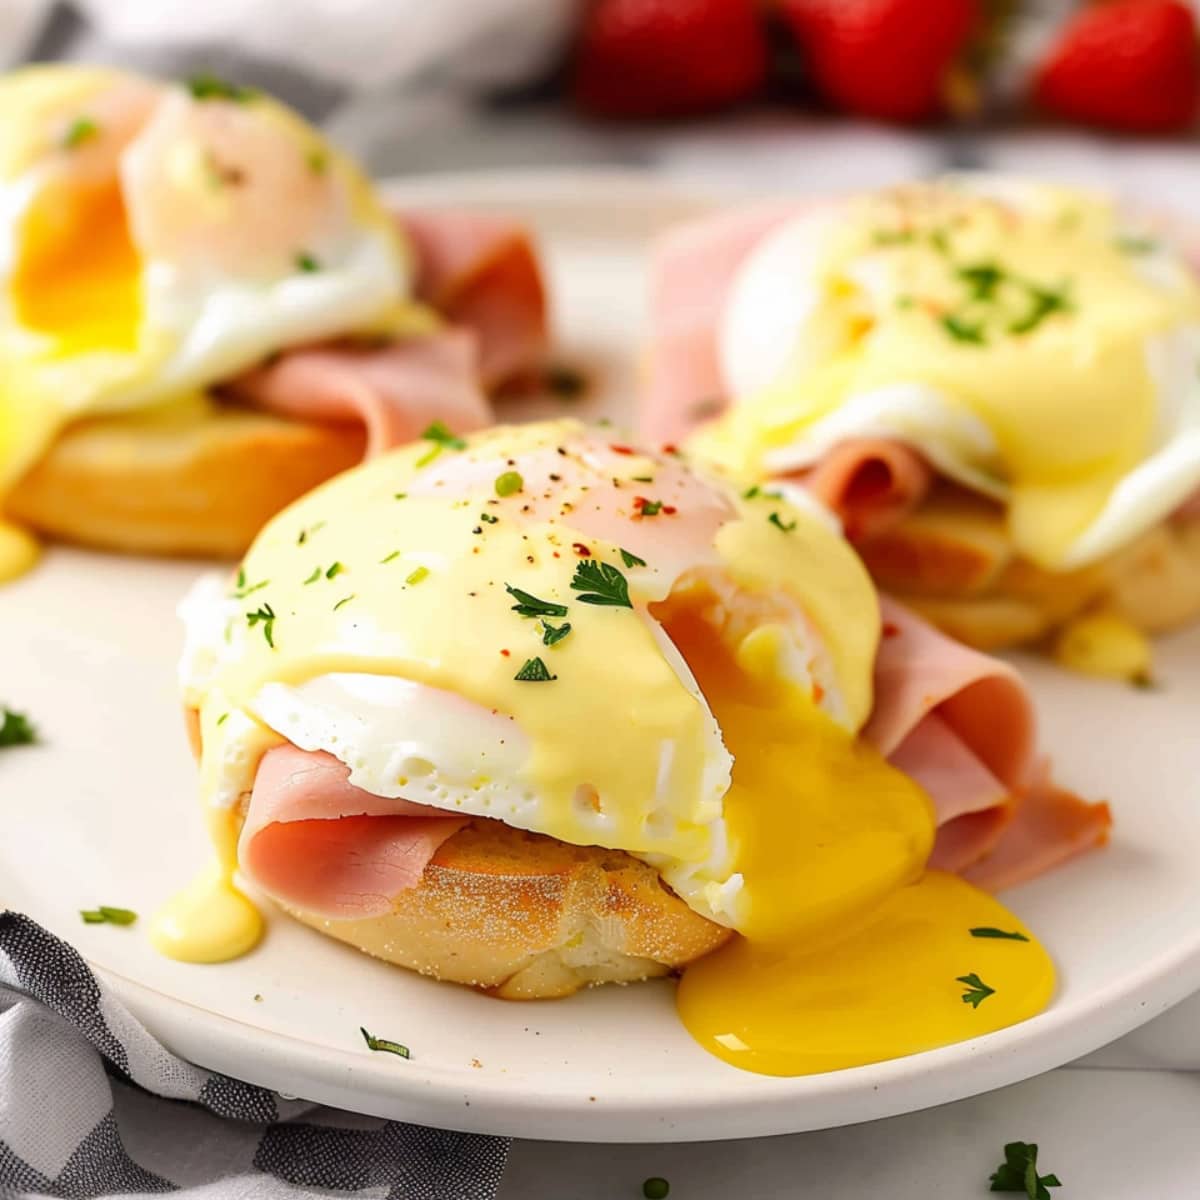 Eggs benedict with ham, poached egg and creamy hollandaise sauce